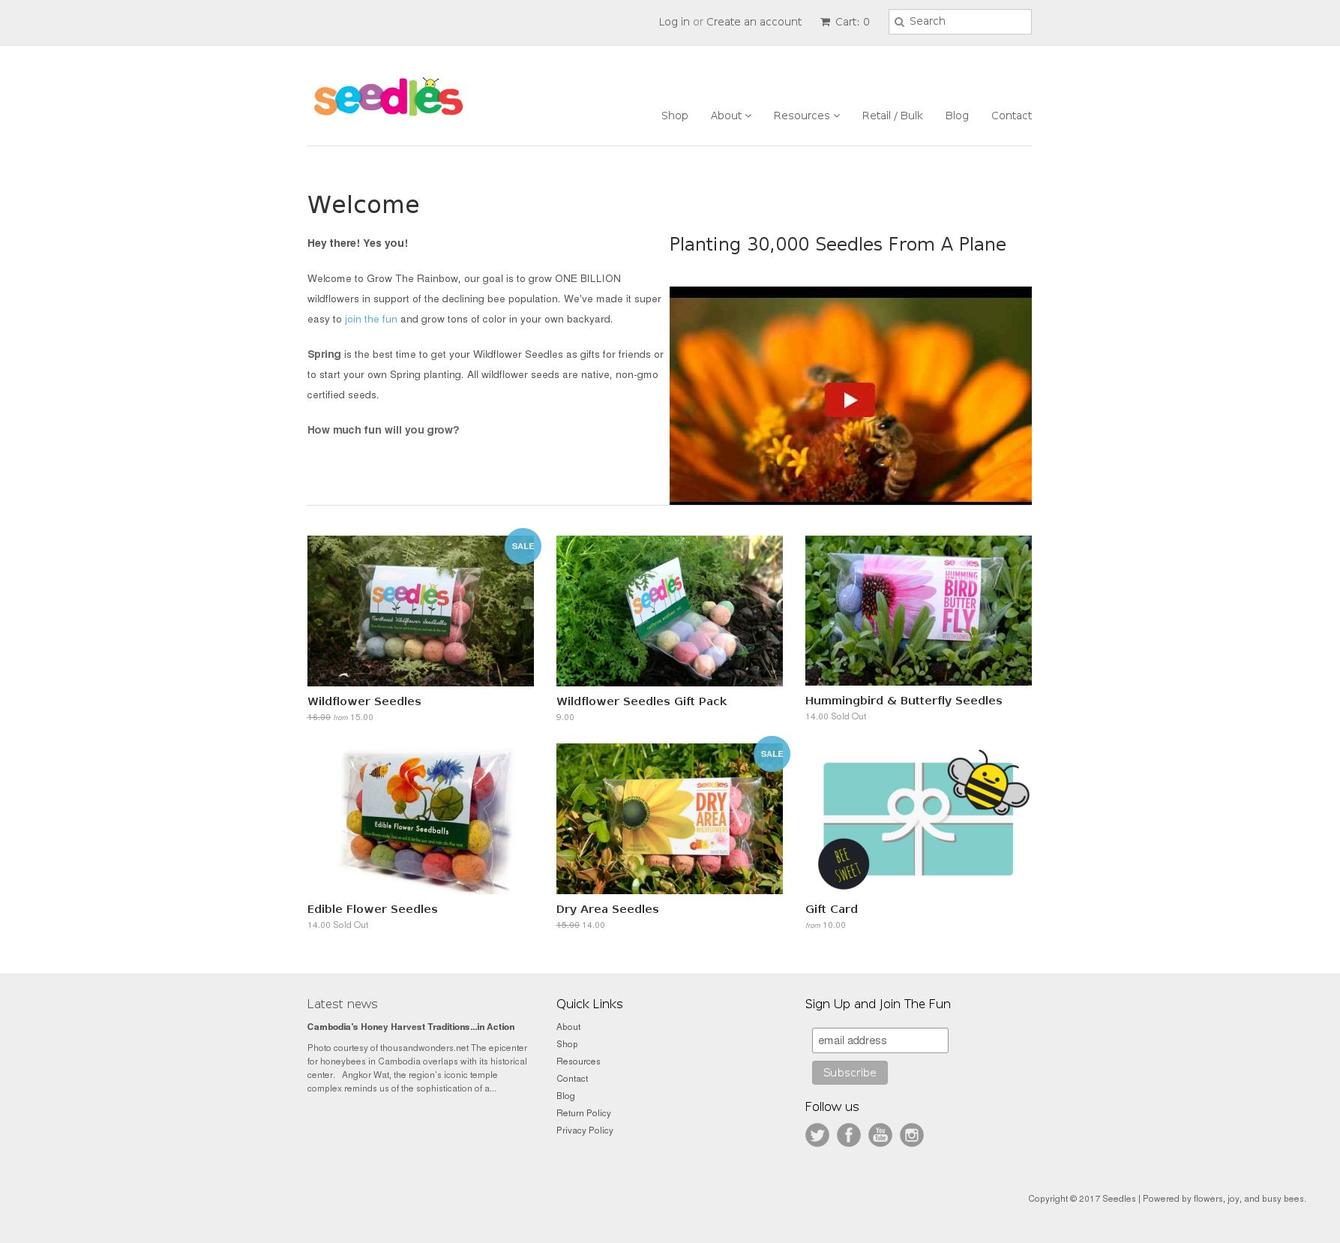 turbo Shopify theme site example growtherainbow.com